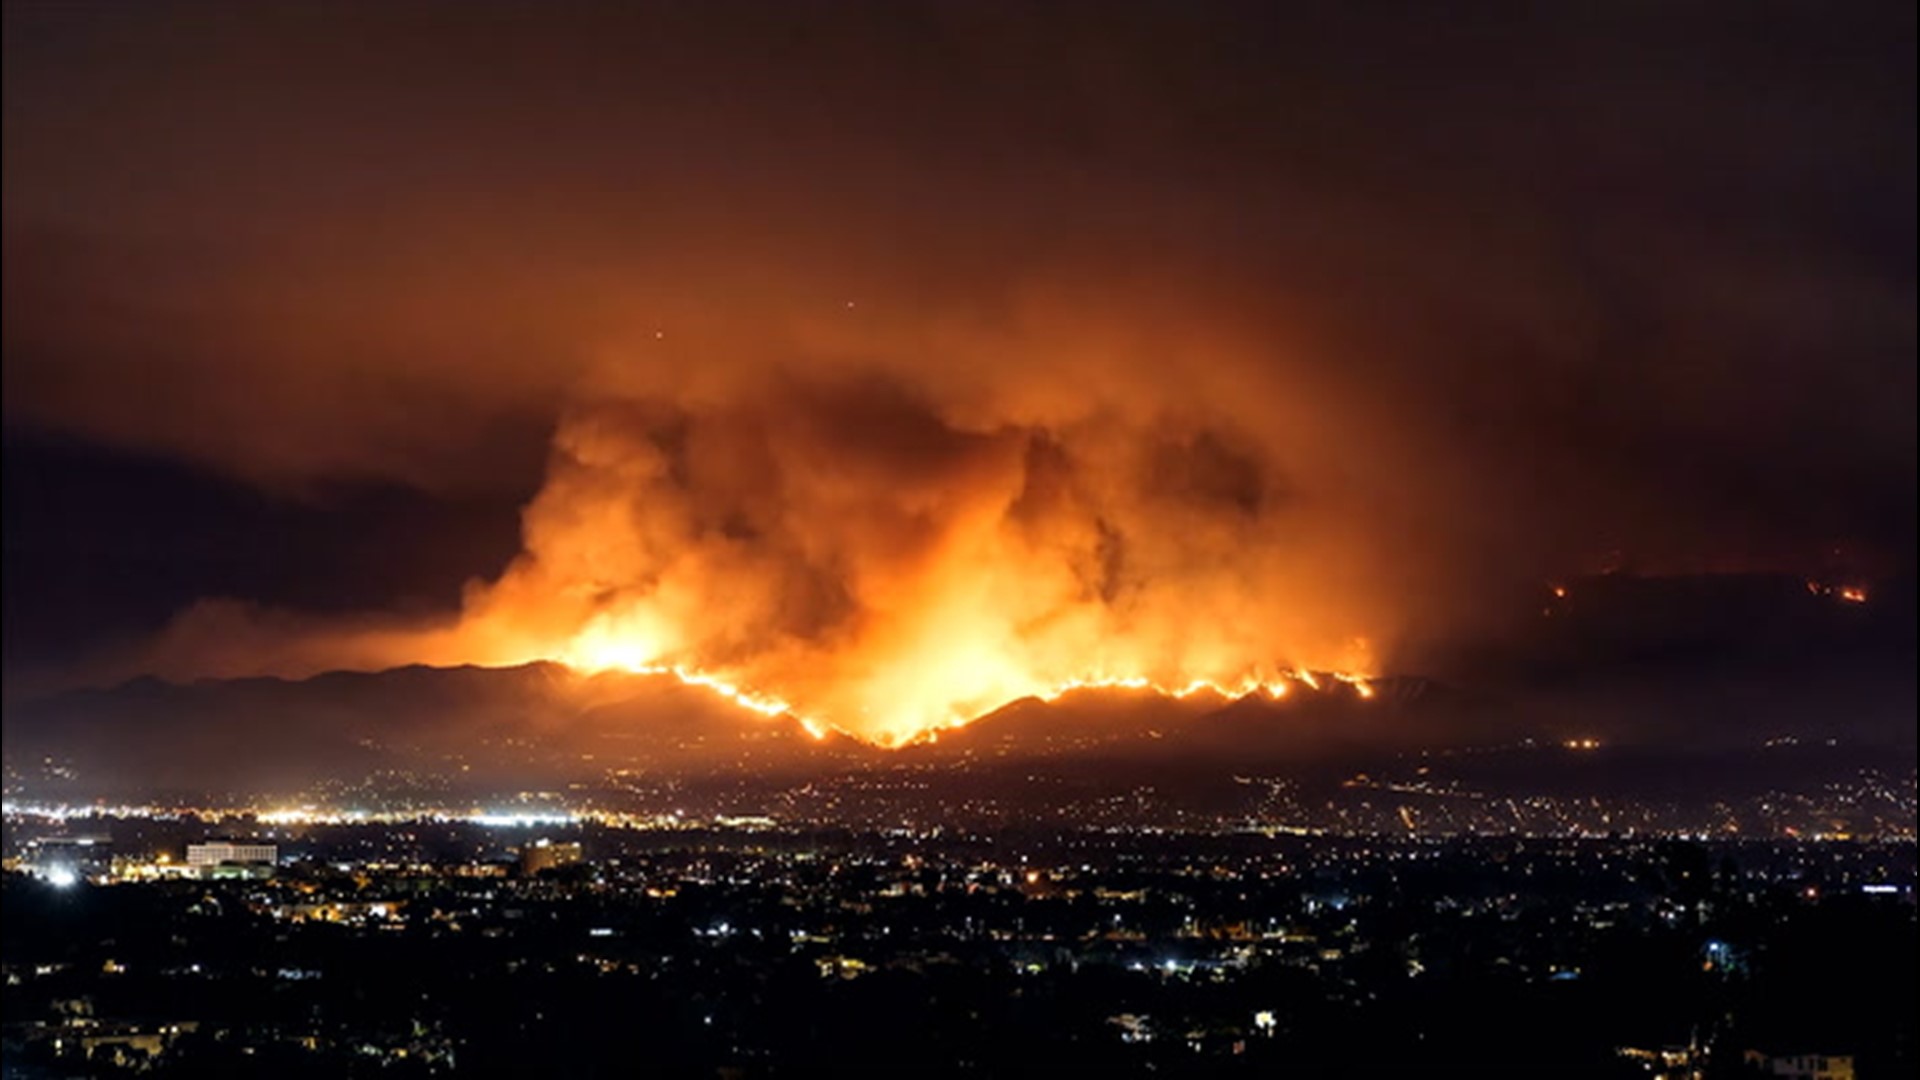 Ingredients are coming together for another potentially disastrous and record-setting year for wildfires. AccuWeather Senior Meteorologist Dave Samuhel has the forecast.